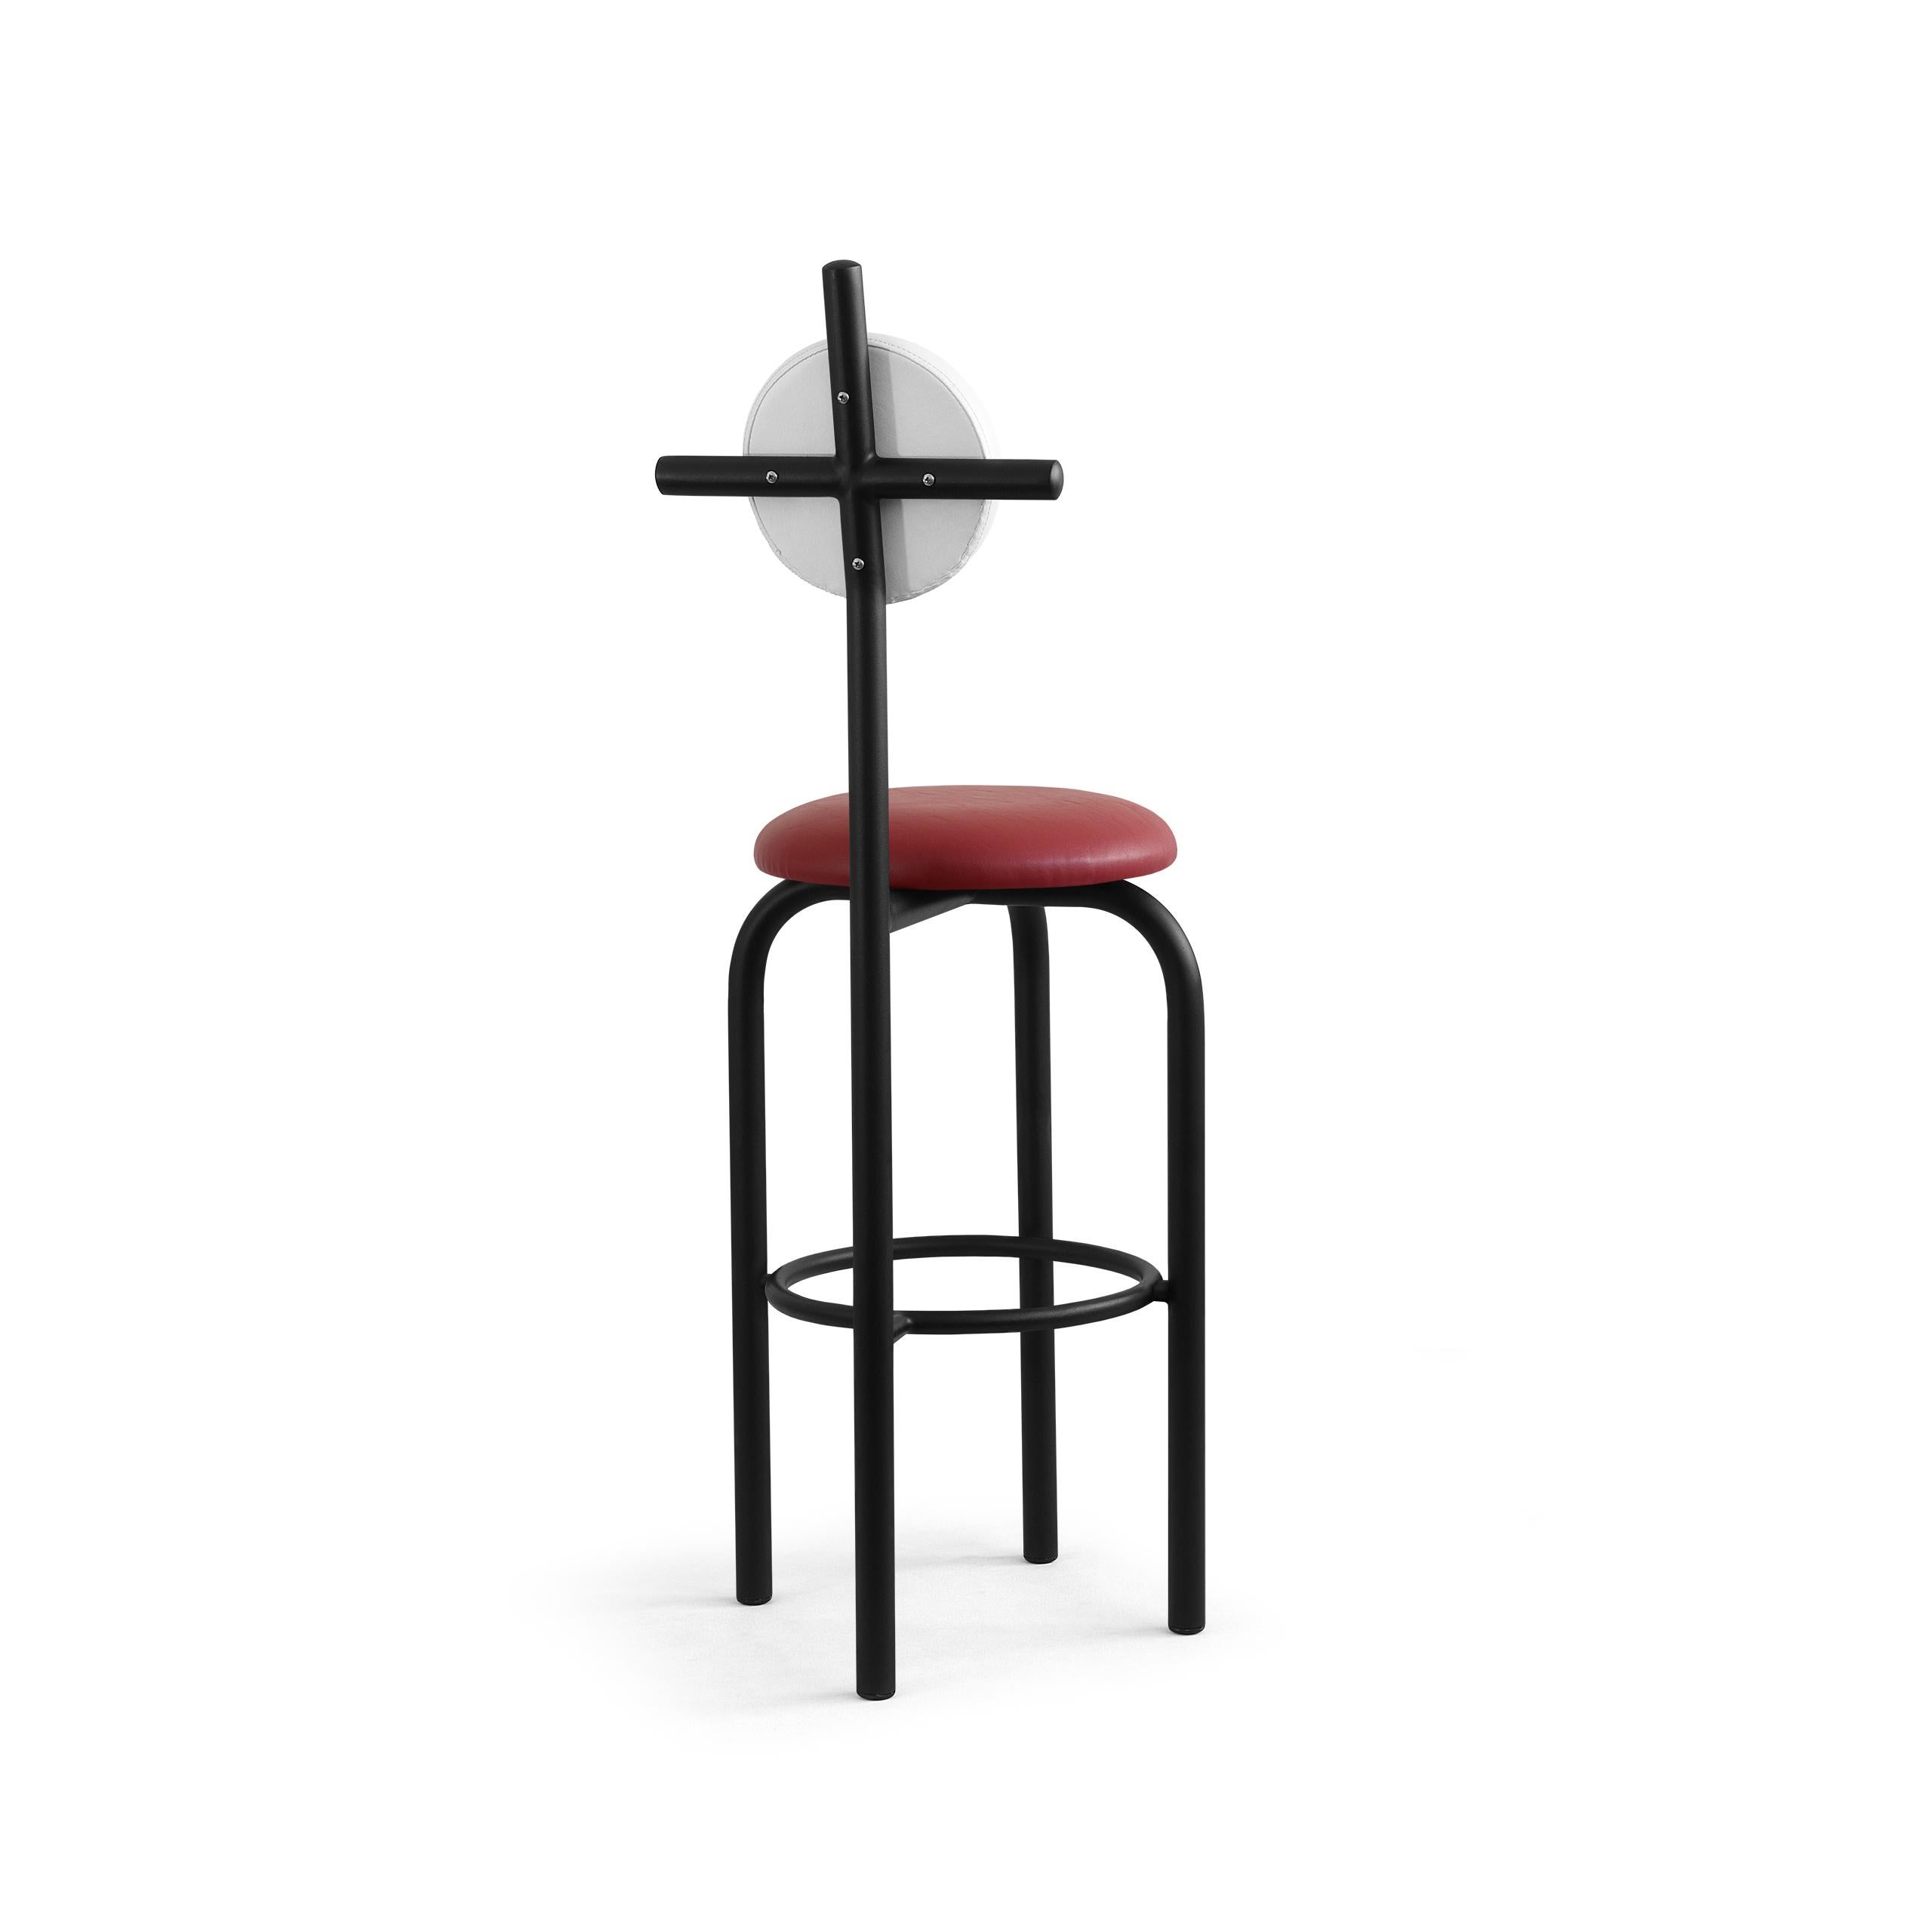 PK19 Impermeable Bar Stool, Red Seat & Black Metal Structure by Paulo Kobylka In New Condition For Sale In Londrina, Paraná